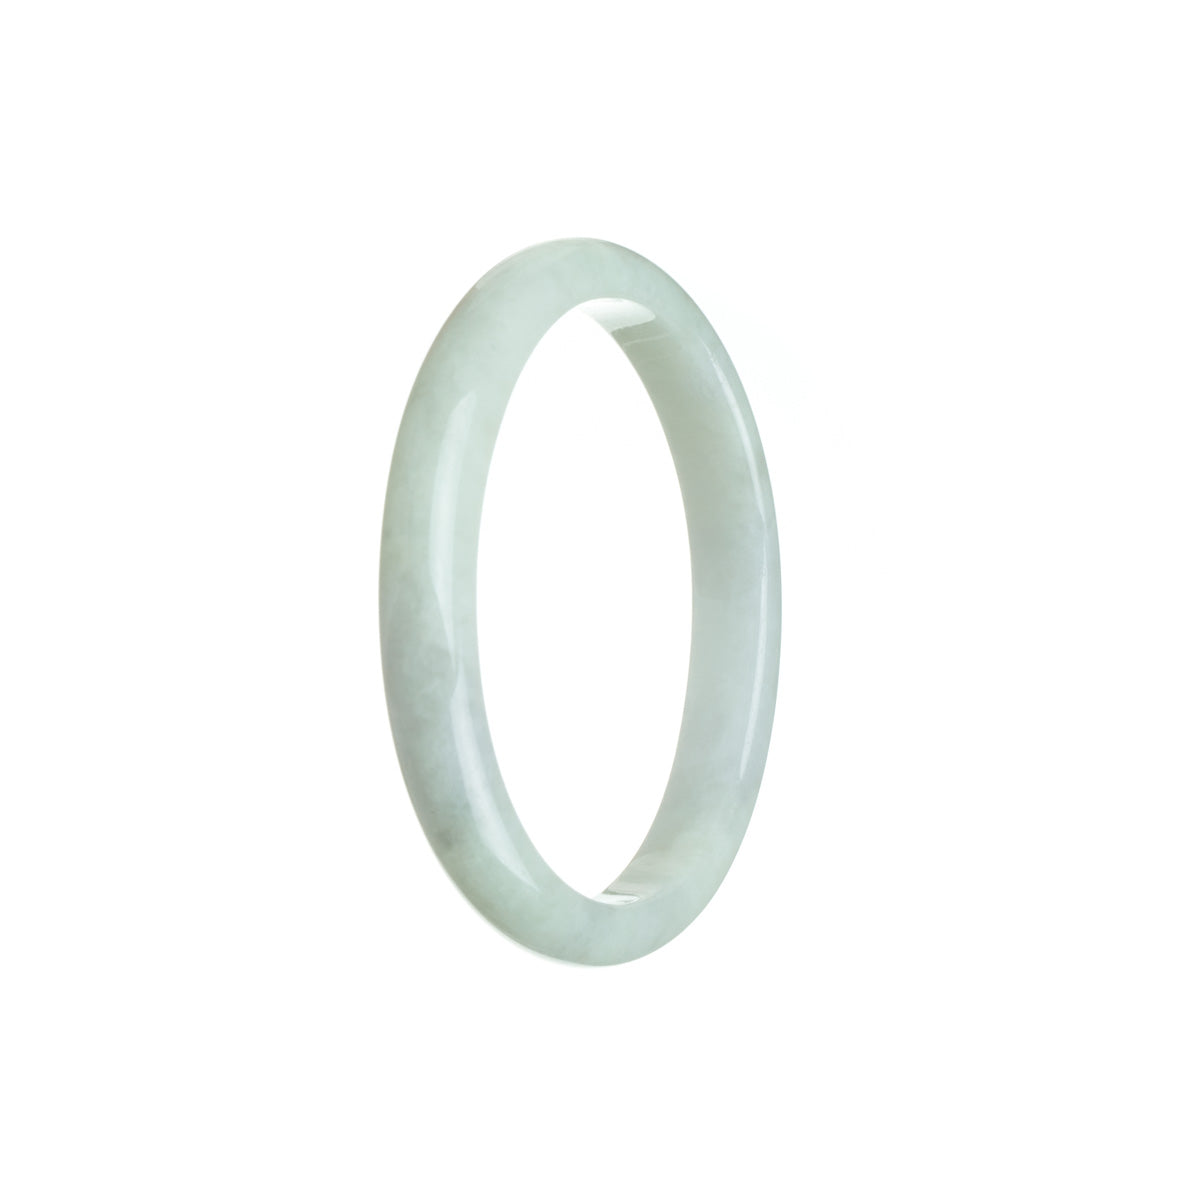 A beautiful oval jade bangle with a pale green color and subtle hints of lavender. This authentic Grade A jade piece measures 54mm and is a stunning addition to any jewelry collection.